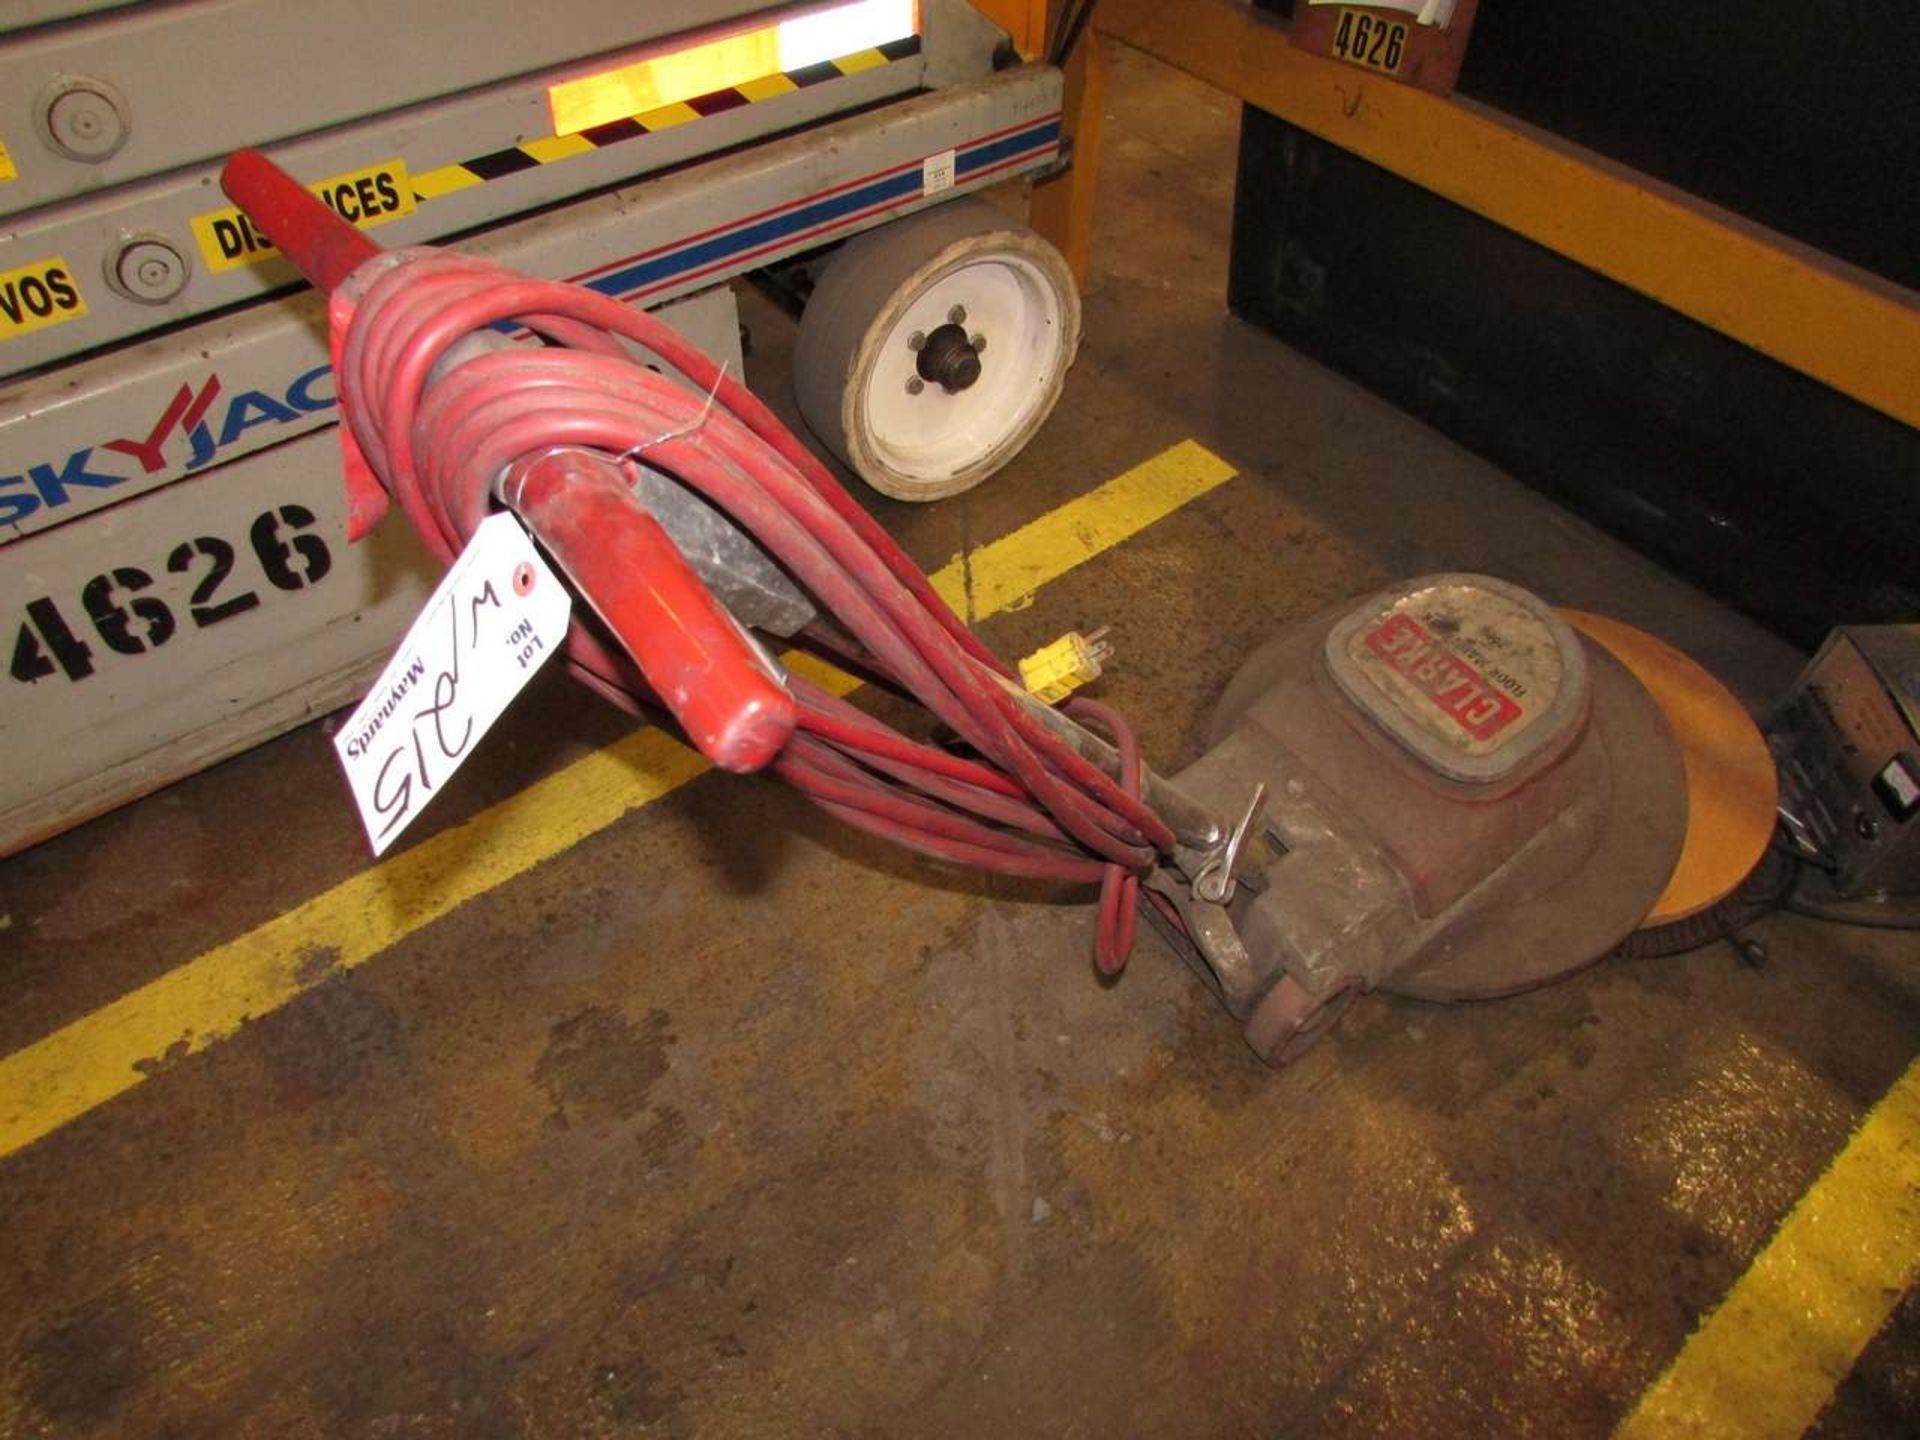 2001 Advance HR-2800C Electric Floor Scrubber - Image 6 of 6